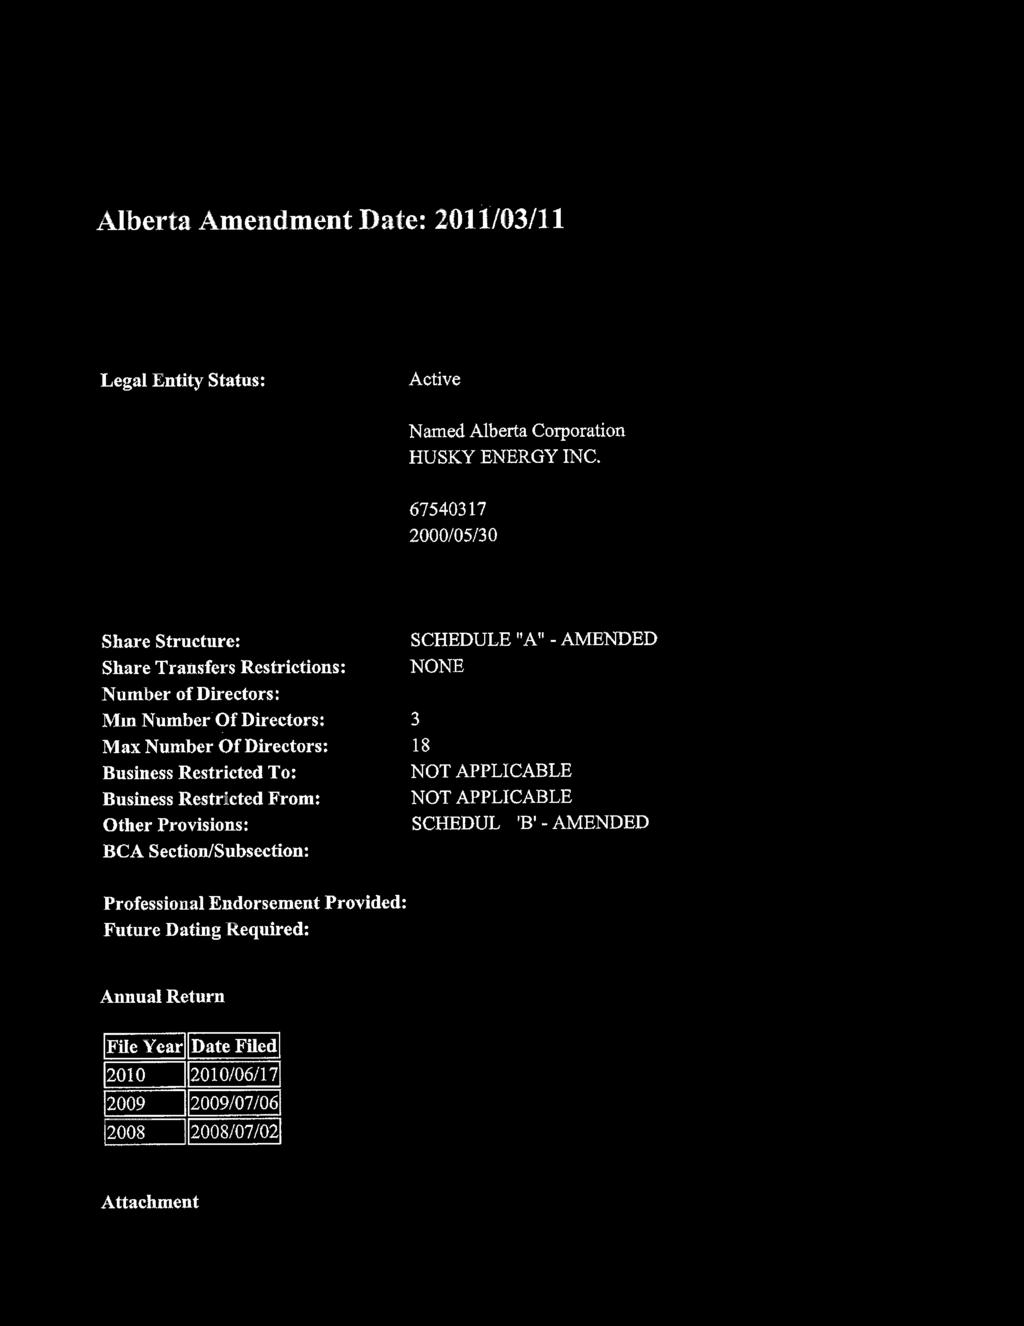 Name/Structure Change Alberta Corporation - Registration Statement Alberta Amendment Date: 2011/03/11 Service Request Number: 16050031 Corporate Access Number: 208858944 Legal Entity Name: HUSKY